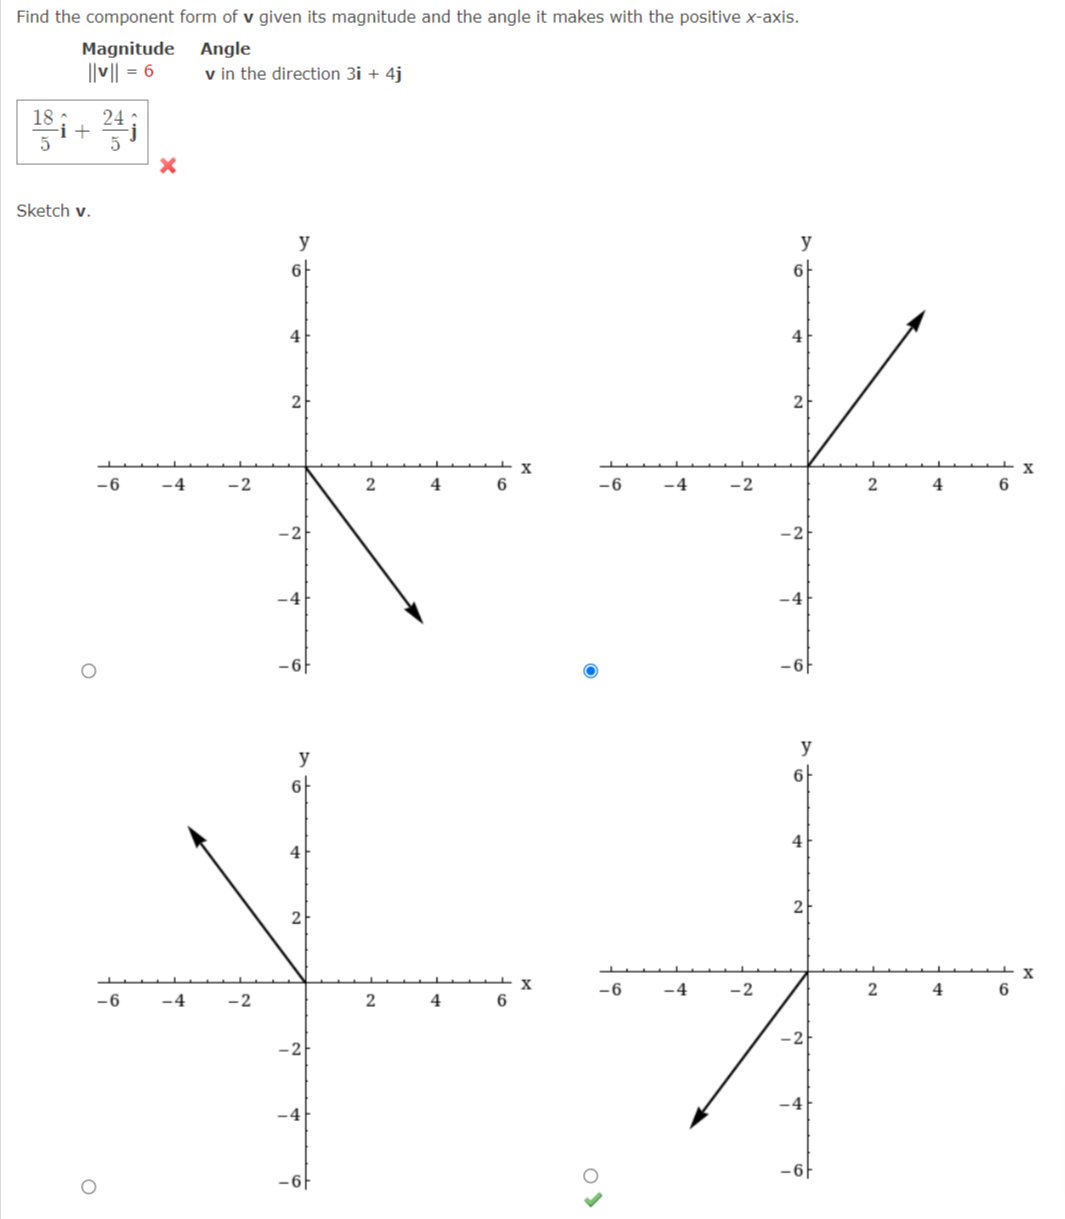 Find the component form of v given its magnitude and the angle it makes with the positive x-axis.
Magnitude Angle
||v|| = 6
v in the direction 3i + 4j
18:
i+
Sketch v.
y
y
4
2
2
X
-6
-2
4
-6
-4
-2
2
4
6
-2
-4
-6F
y
y
6
6
4
4
2
X
6
-6
-4
-2
4
-6
-4
-2
4
-2
-2
-4
-6F
